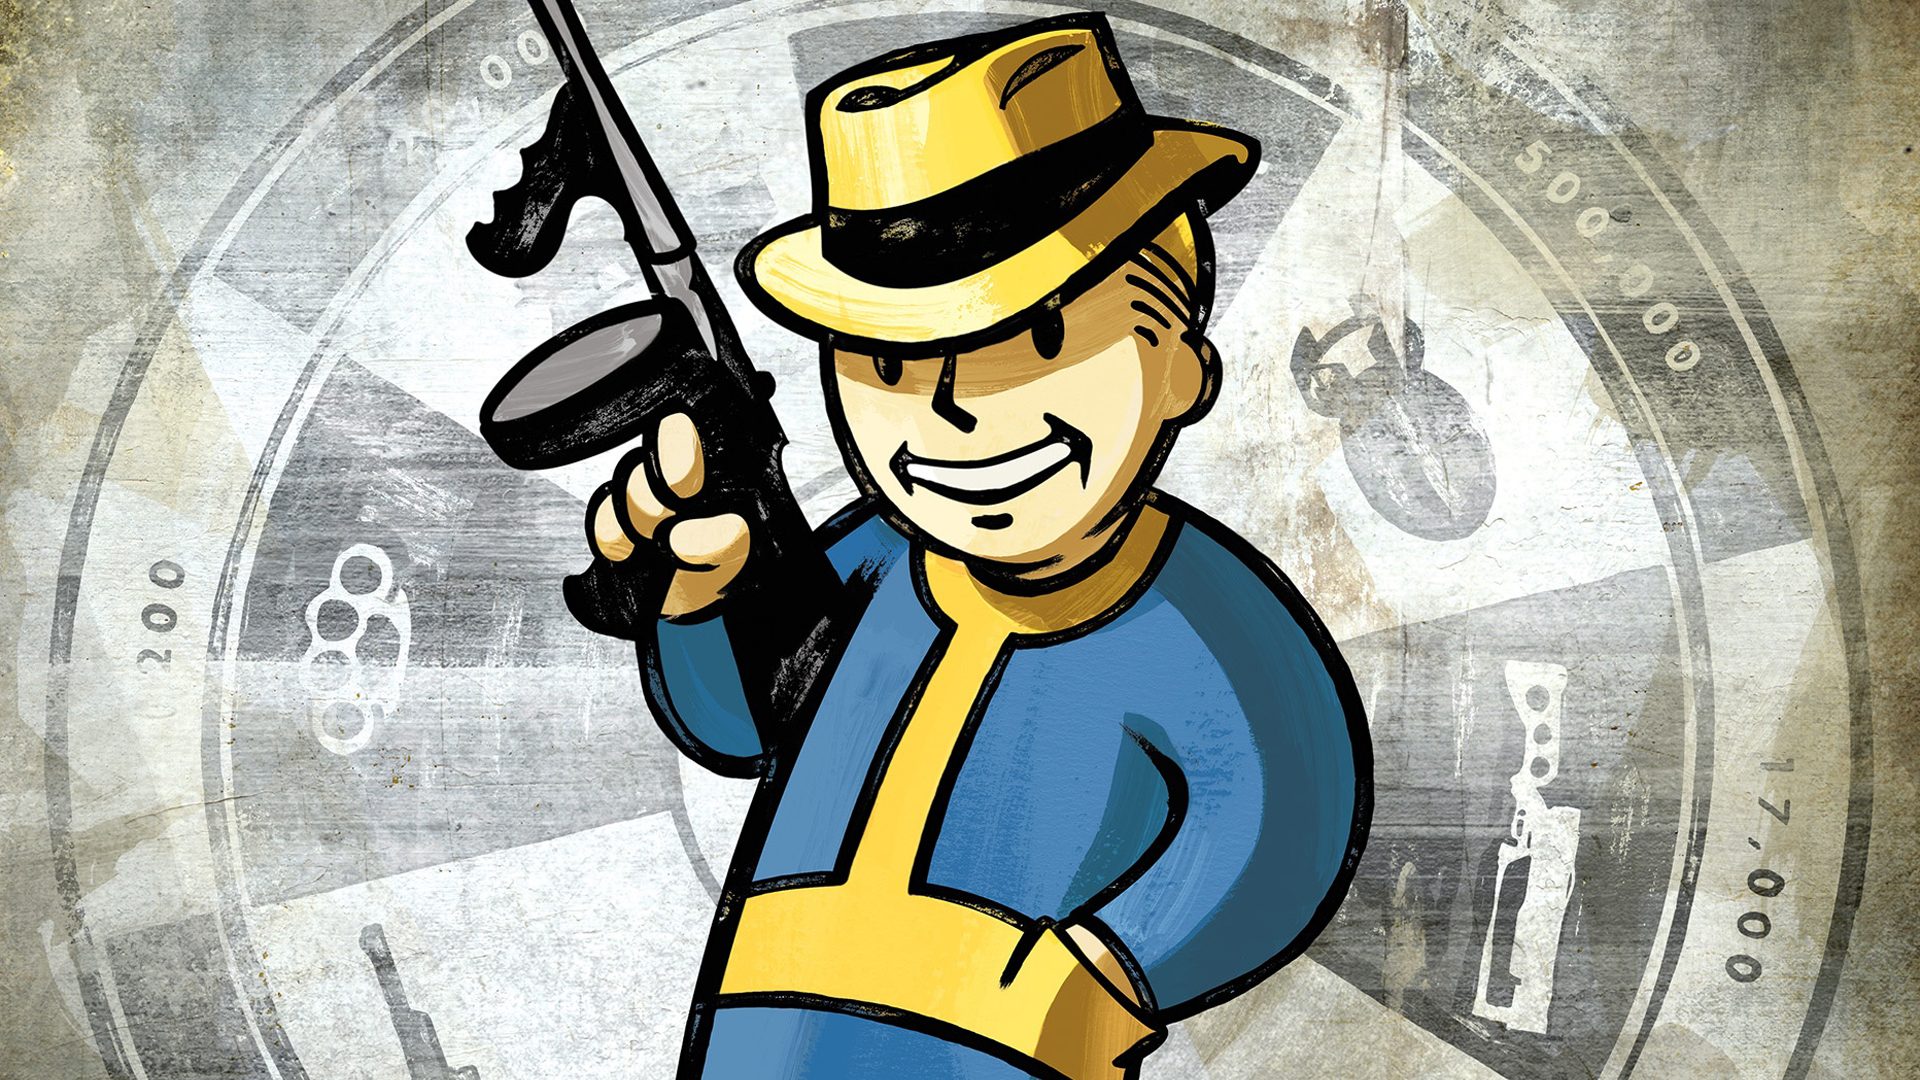 Future Obsidian-made Fallout Games ‘Very Doubtful’